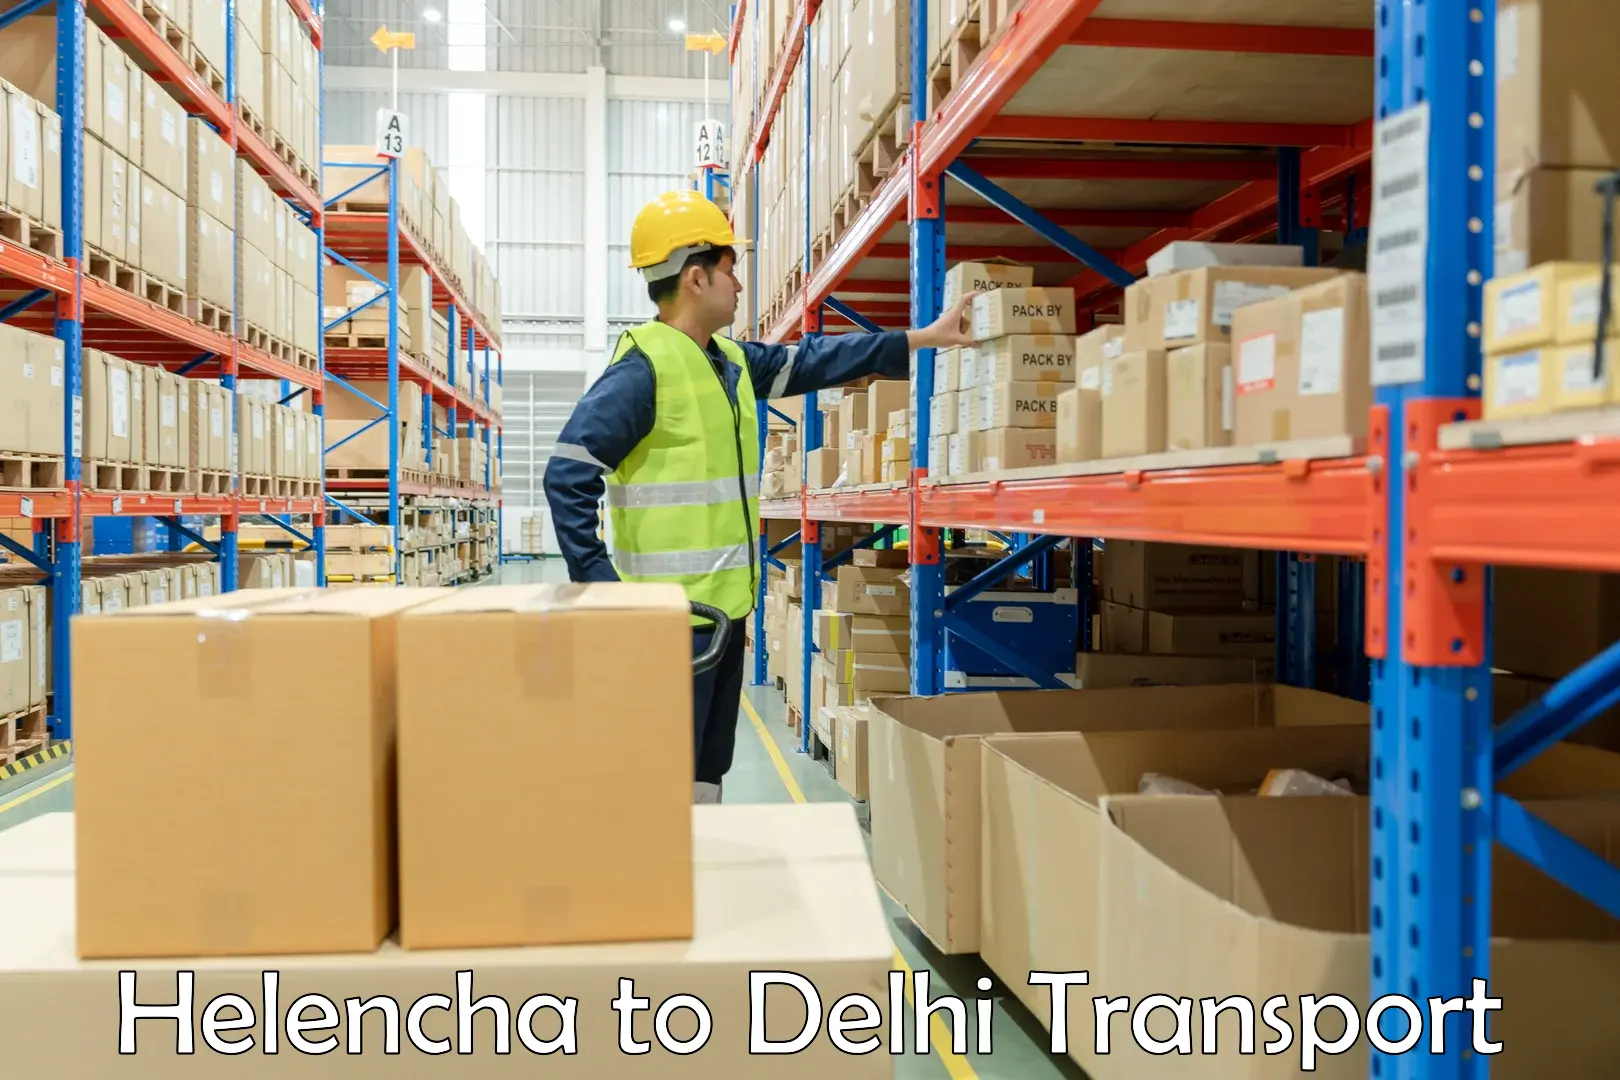 Nationwide transport services Helencha to Delhi